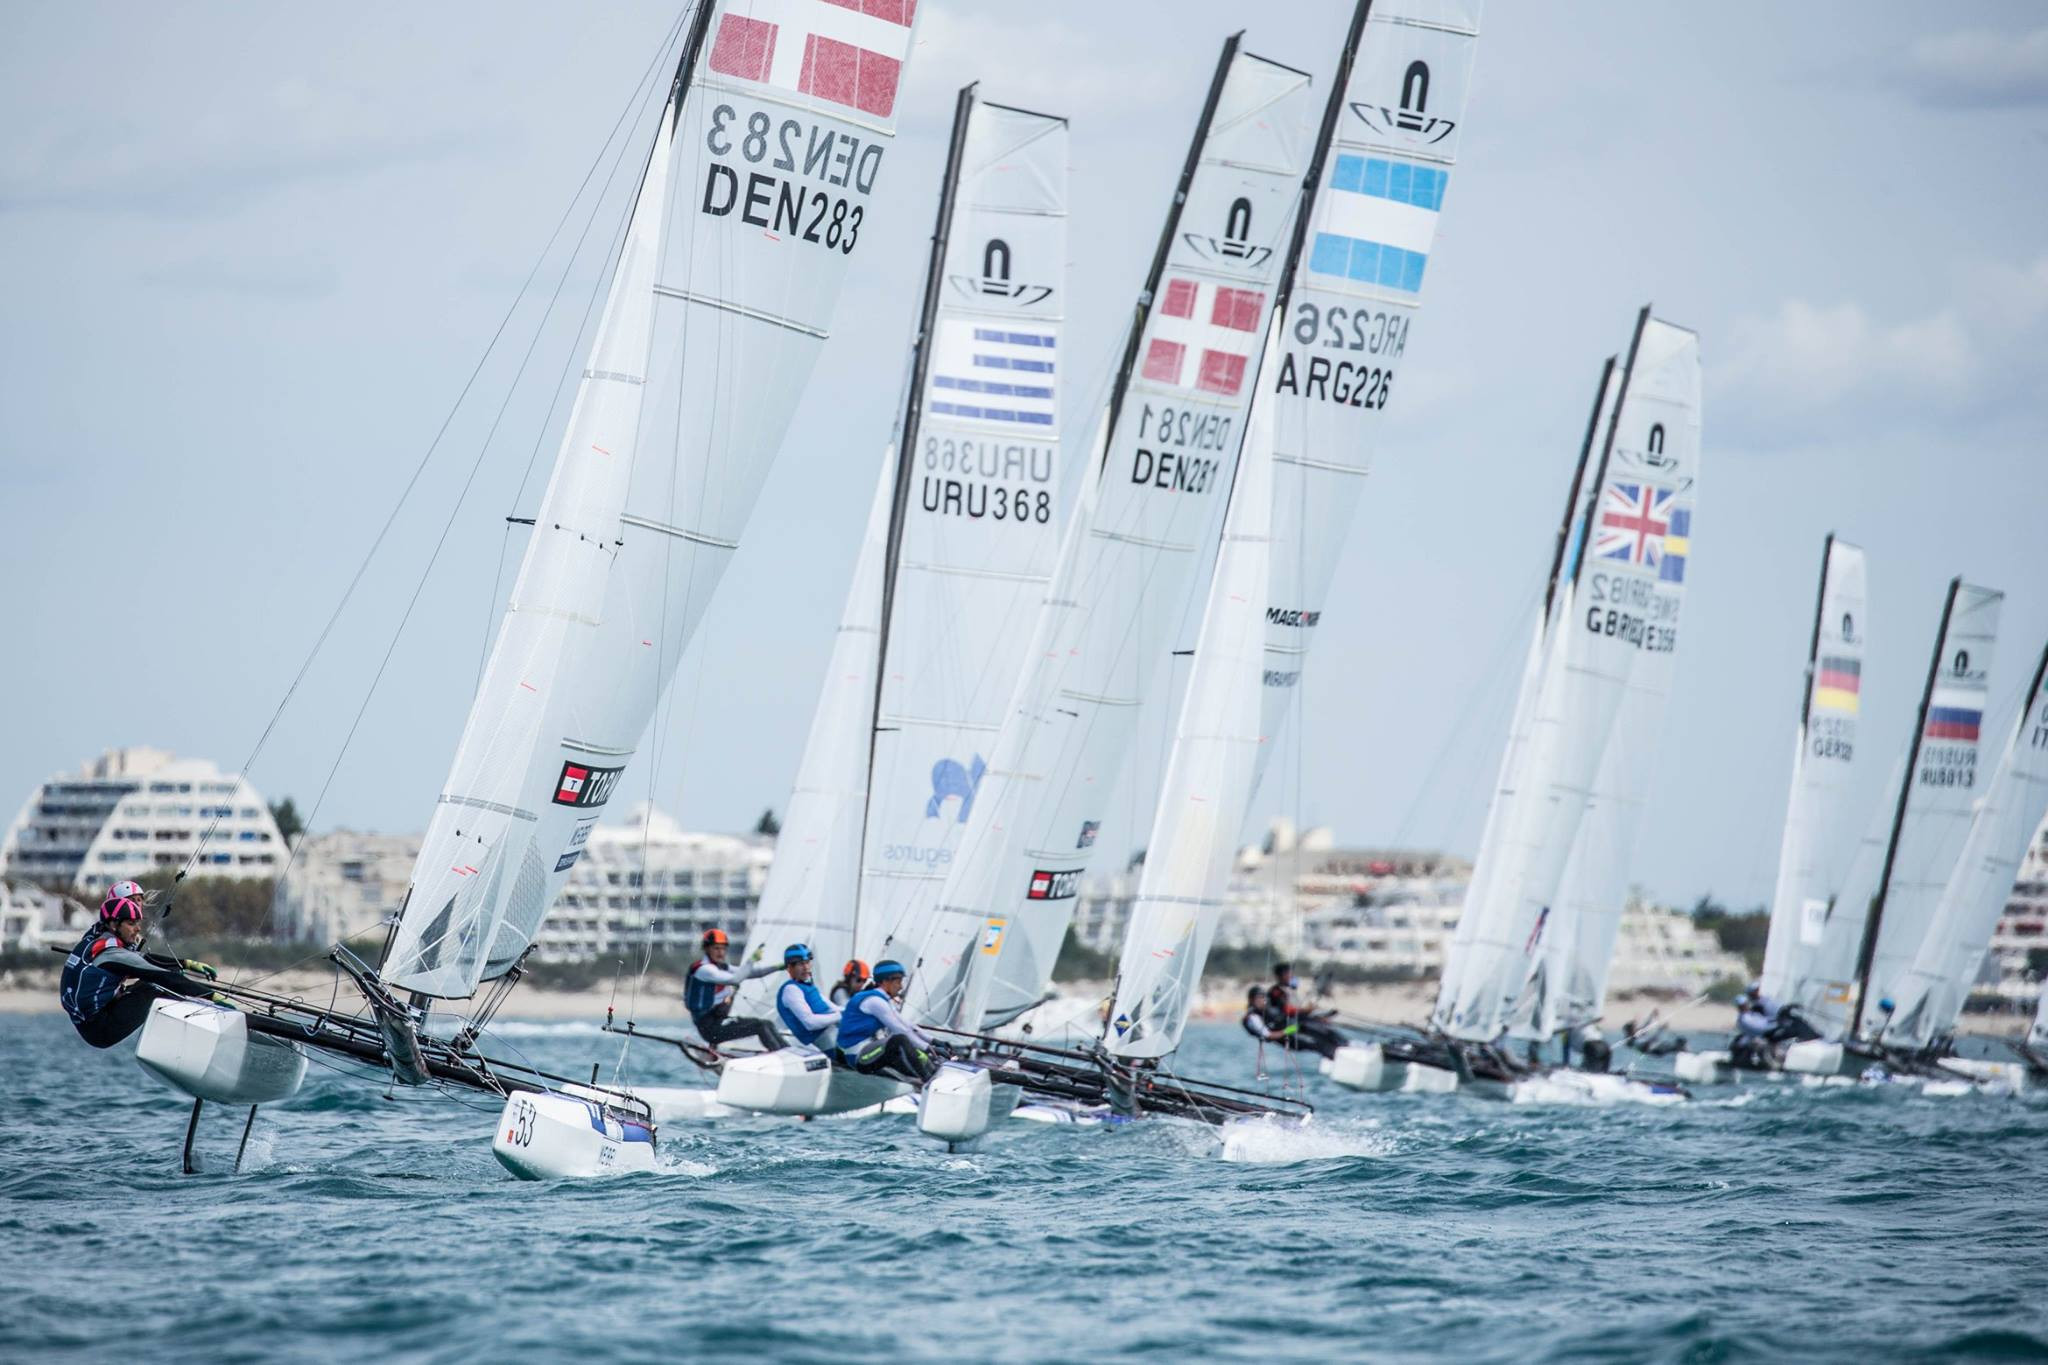 Denmark's Lin Ea Cenholt Christiansen and Christian Peter Lübeckafter, left, maintained their lead at the top of the Nacra 17 World Championships standings ©Facebook